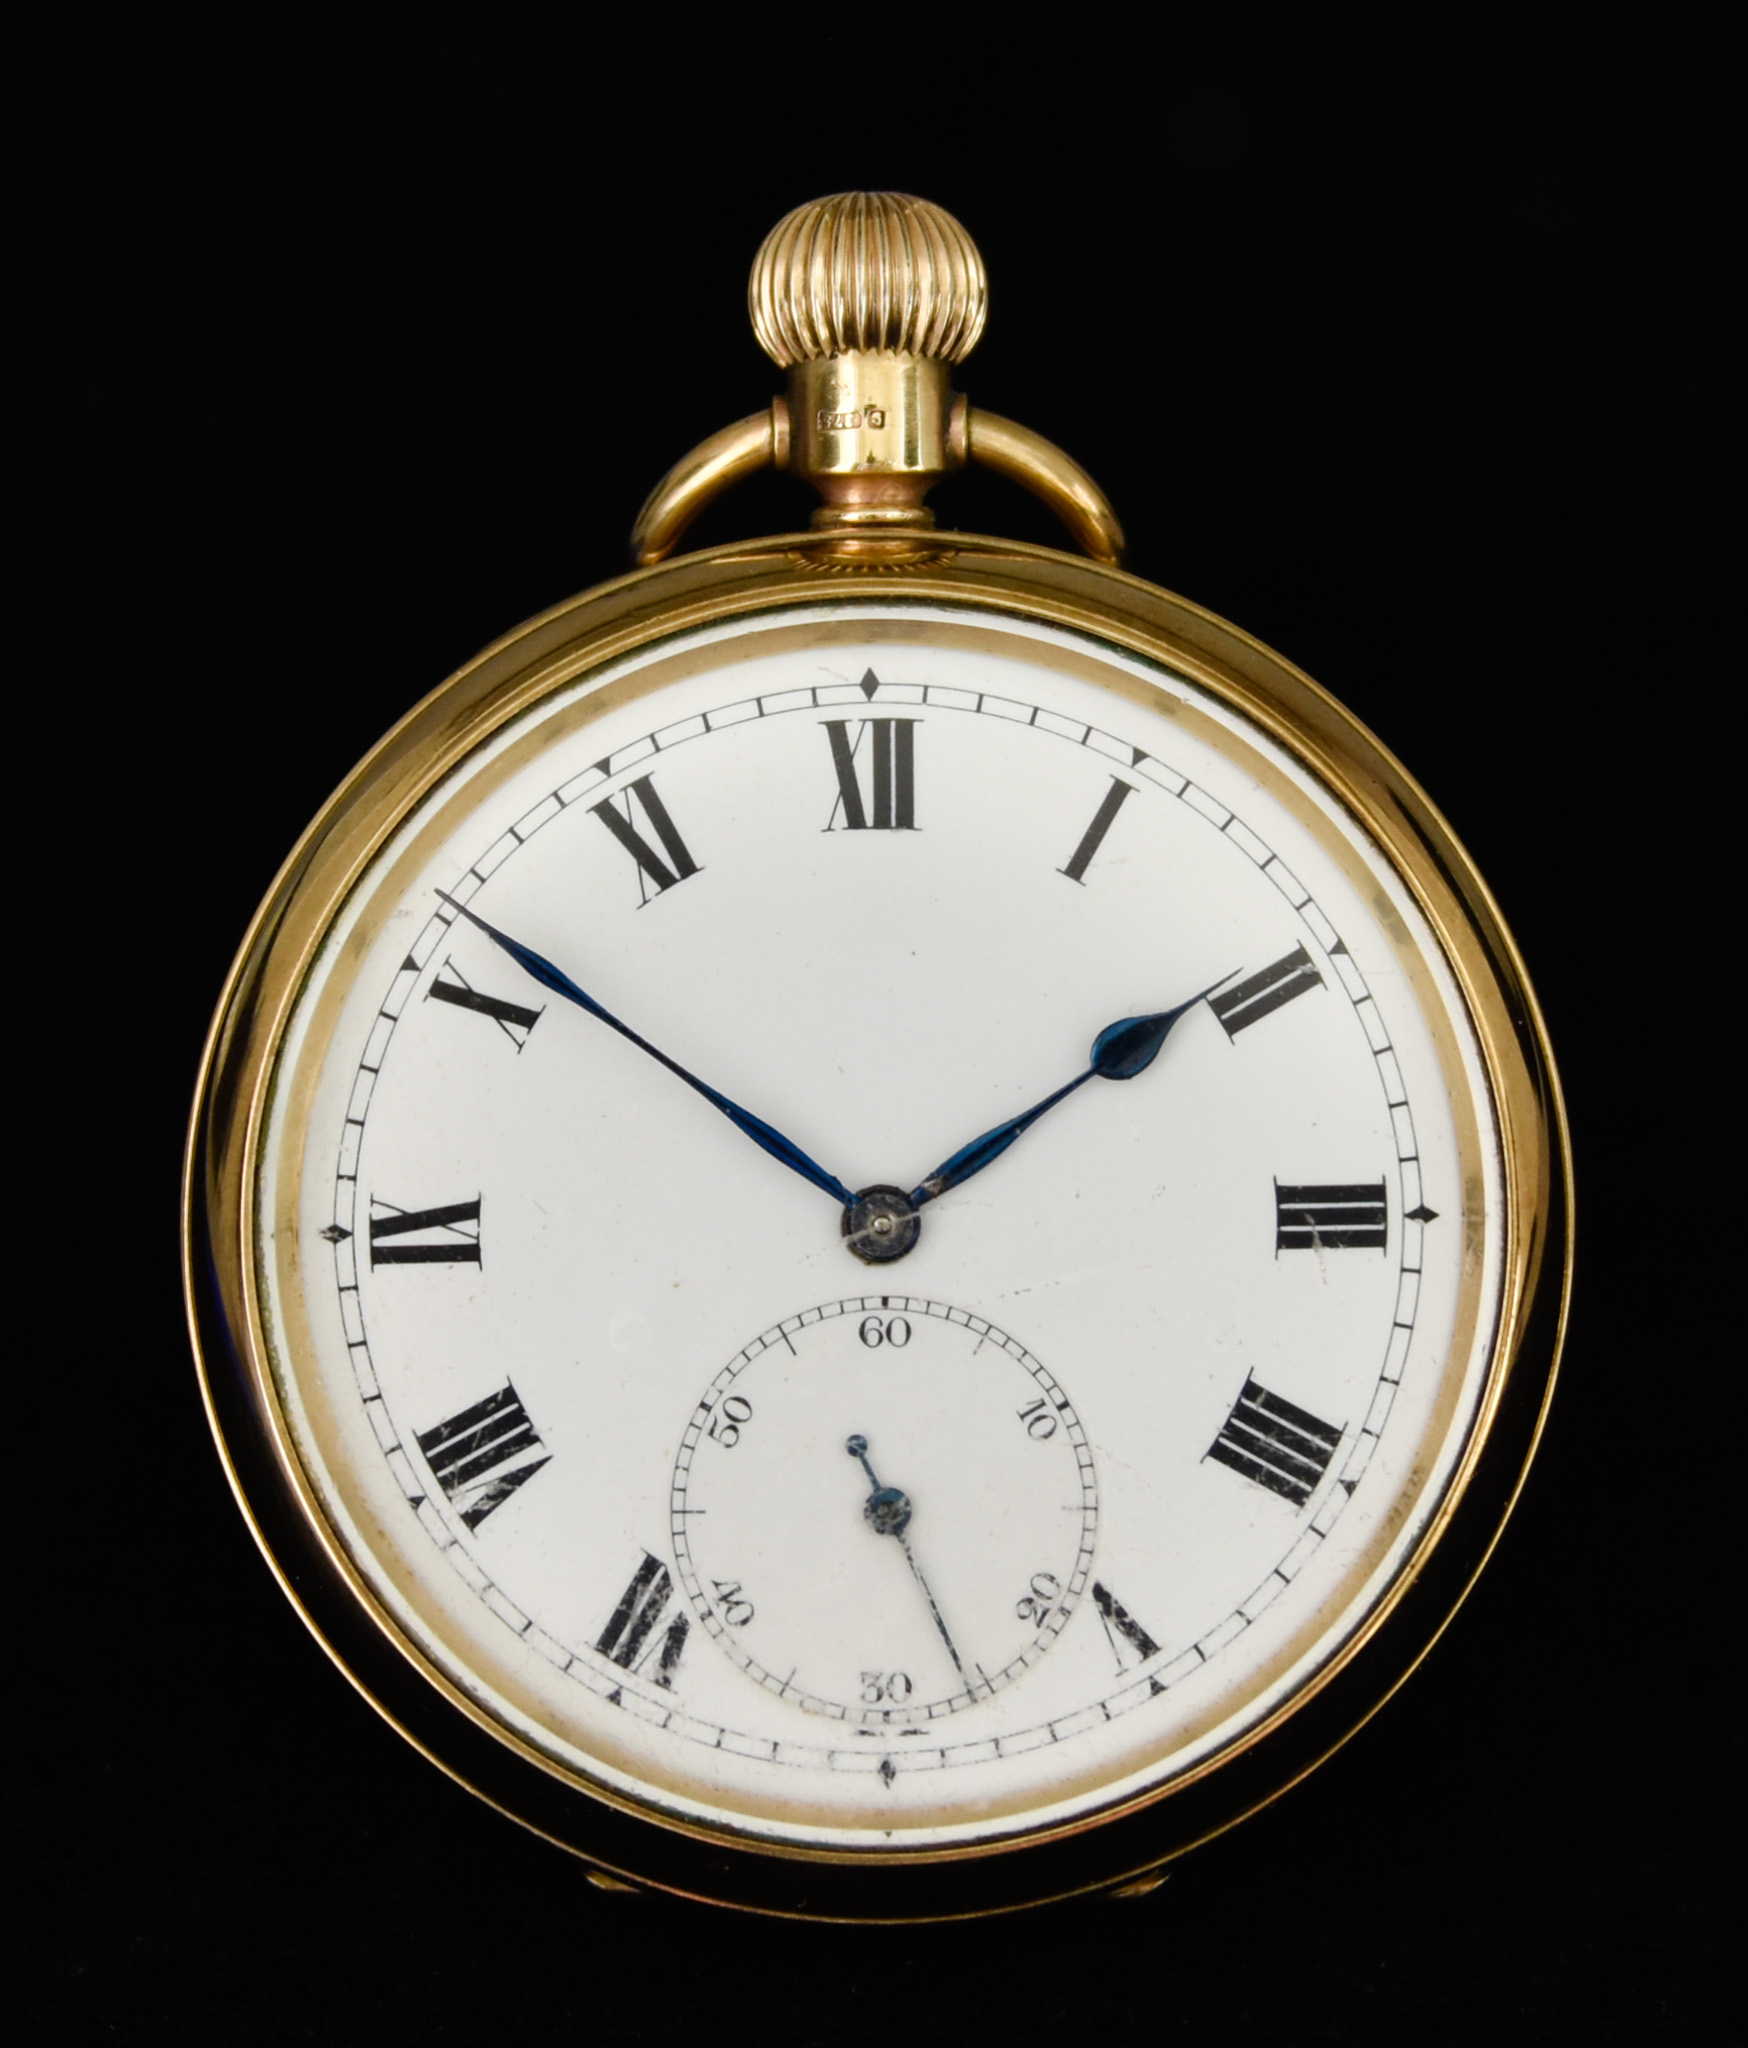 A 9ct Gold Keyless Open Faced Pocket Watch, 50mm diameter case, white enamelled dial with black